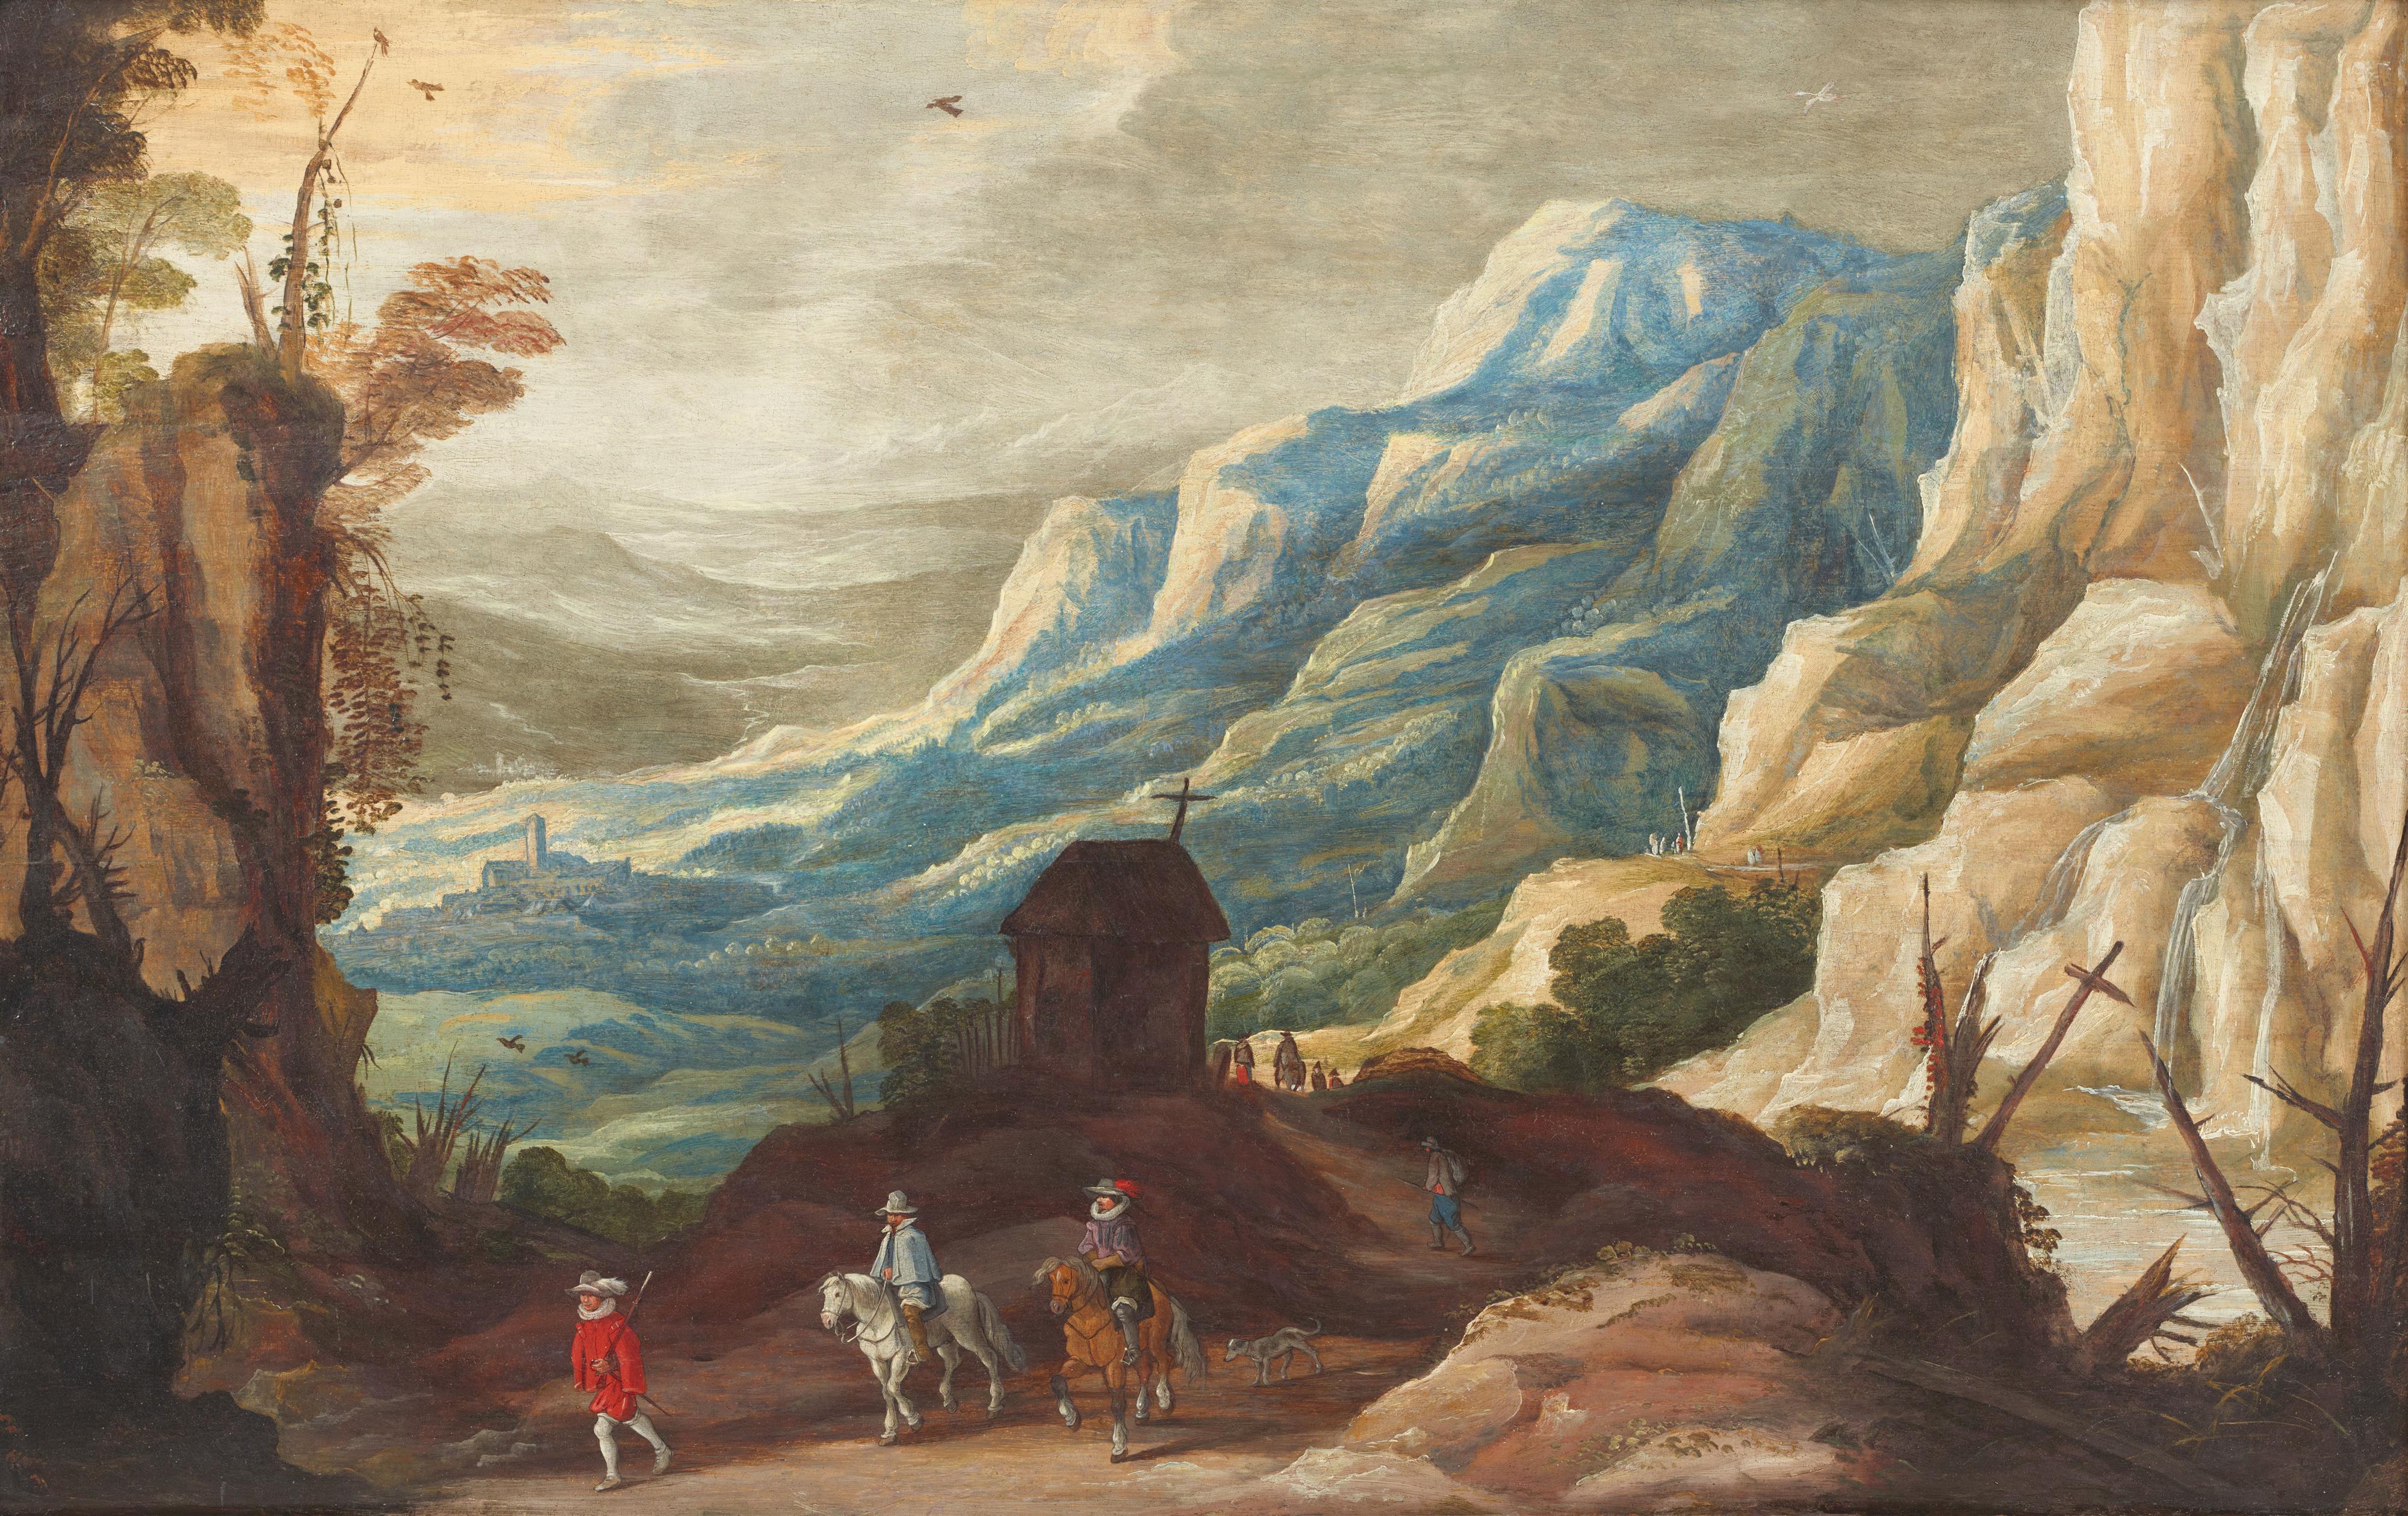 Joos de Momper - Montainous Landscape with Travelleres in the Foreground - image-1